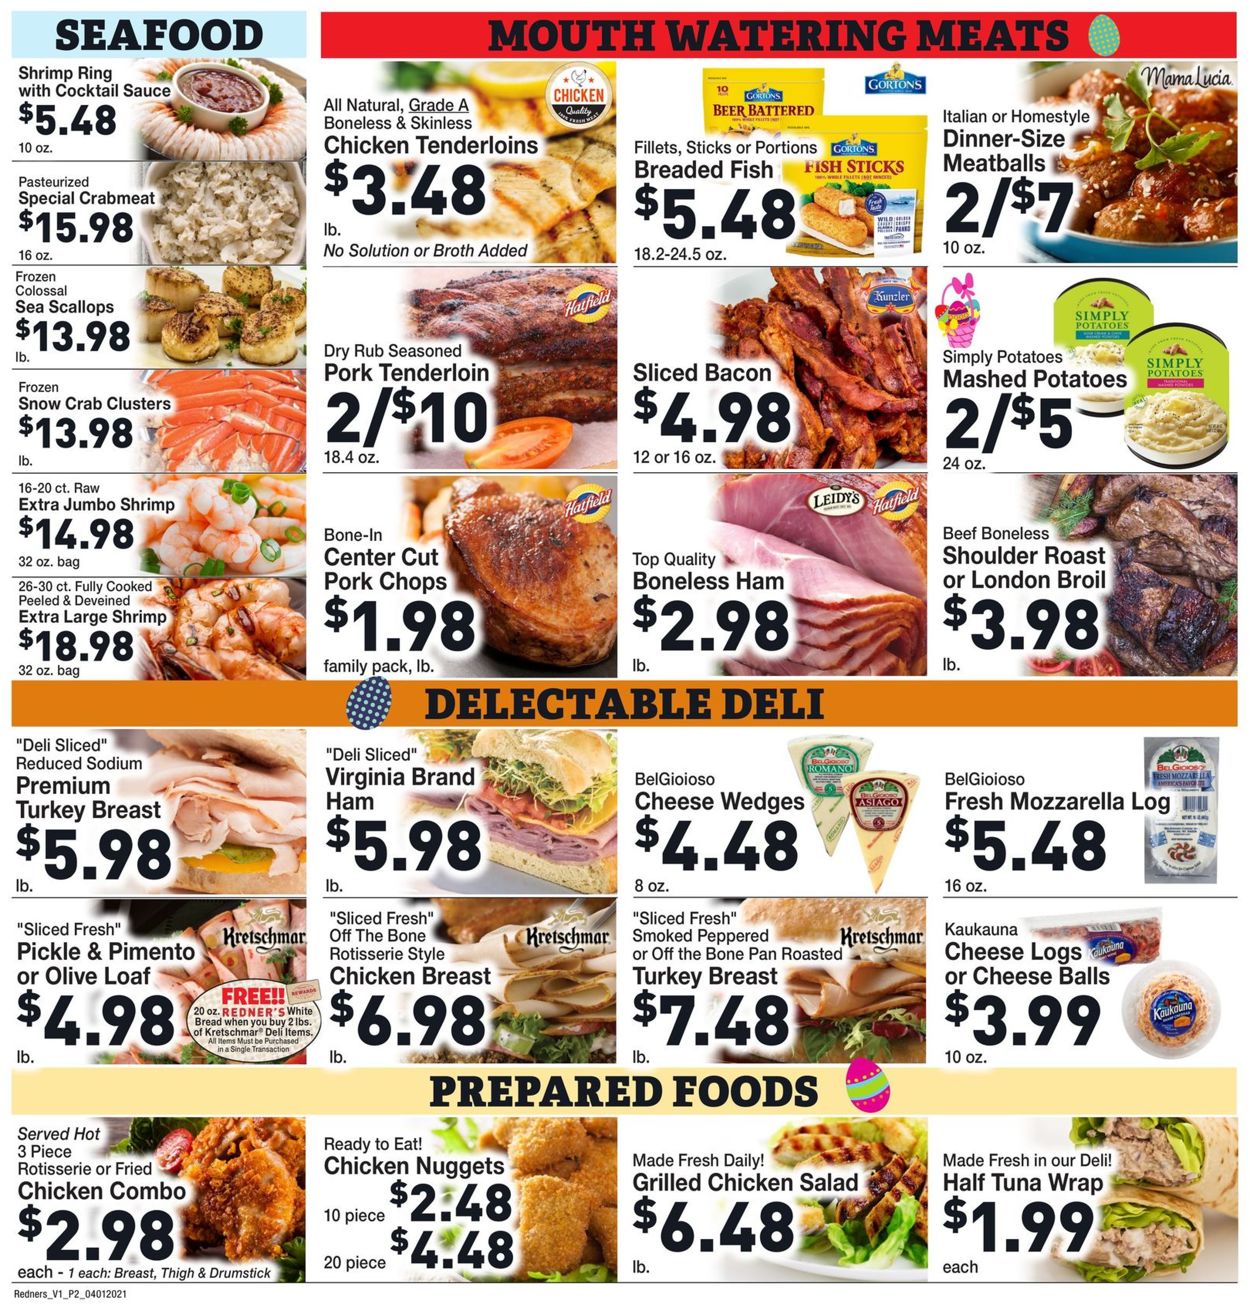 Redner’s Warehouse Market - Easter 2021 Ad Weekly Ad Circular - valid 04/01-04/07/2021 (Page 4)